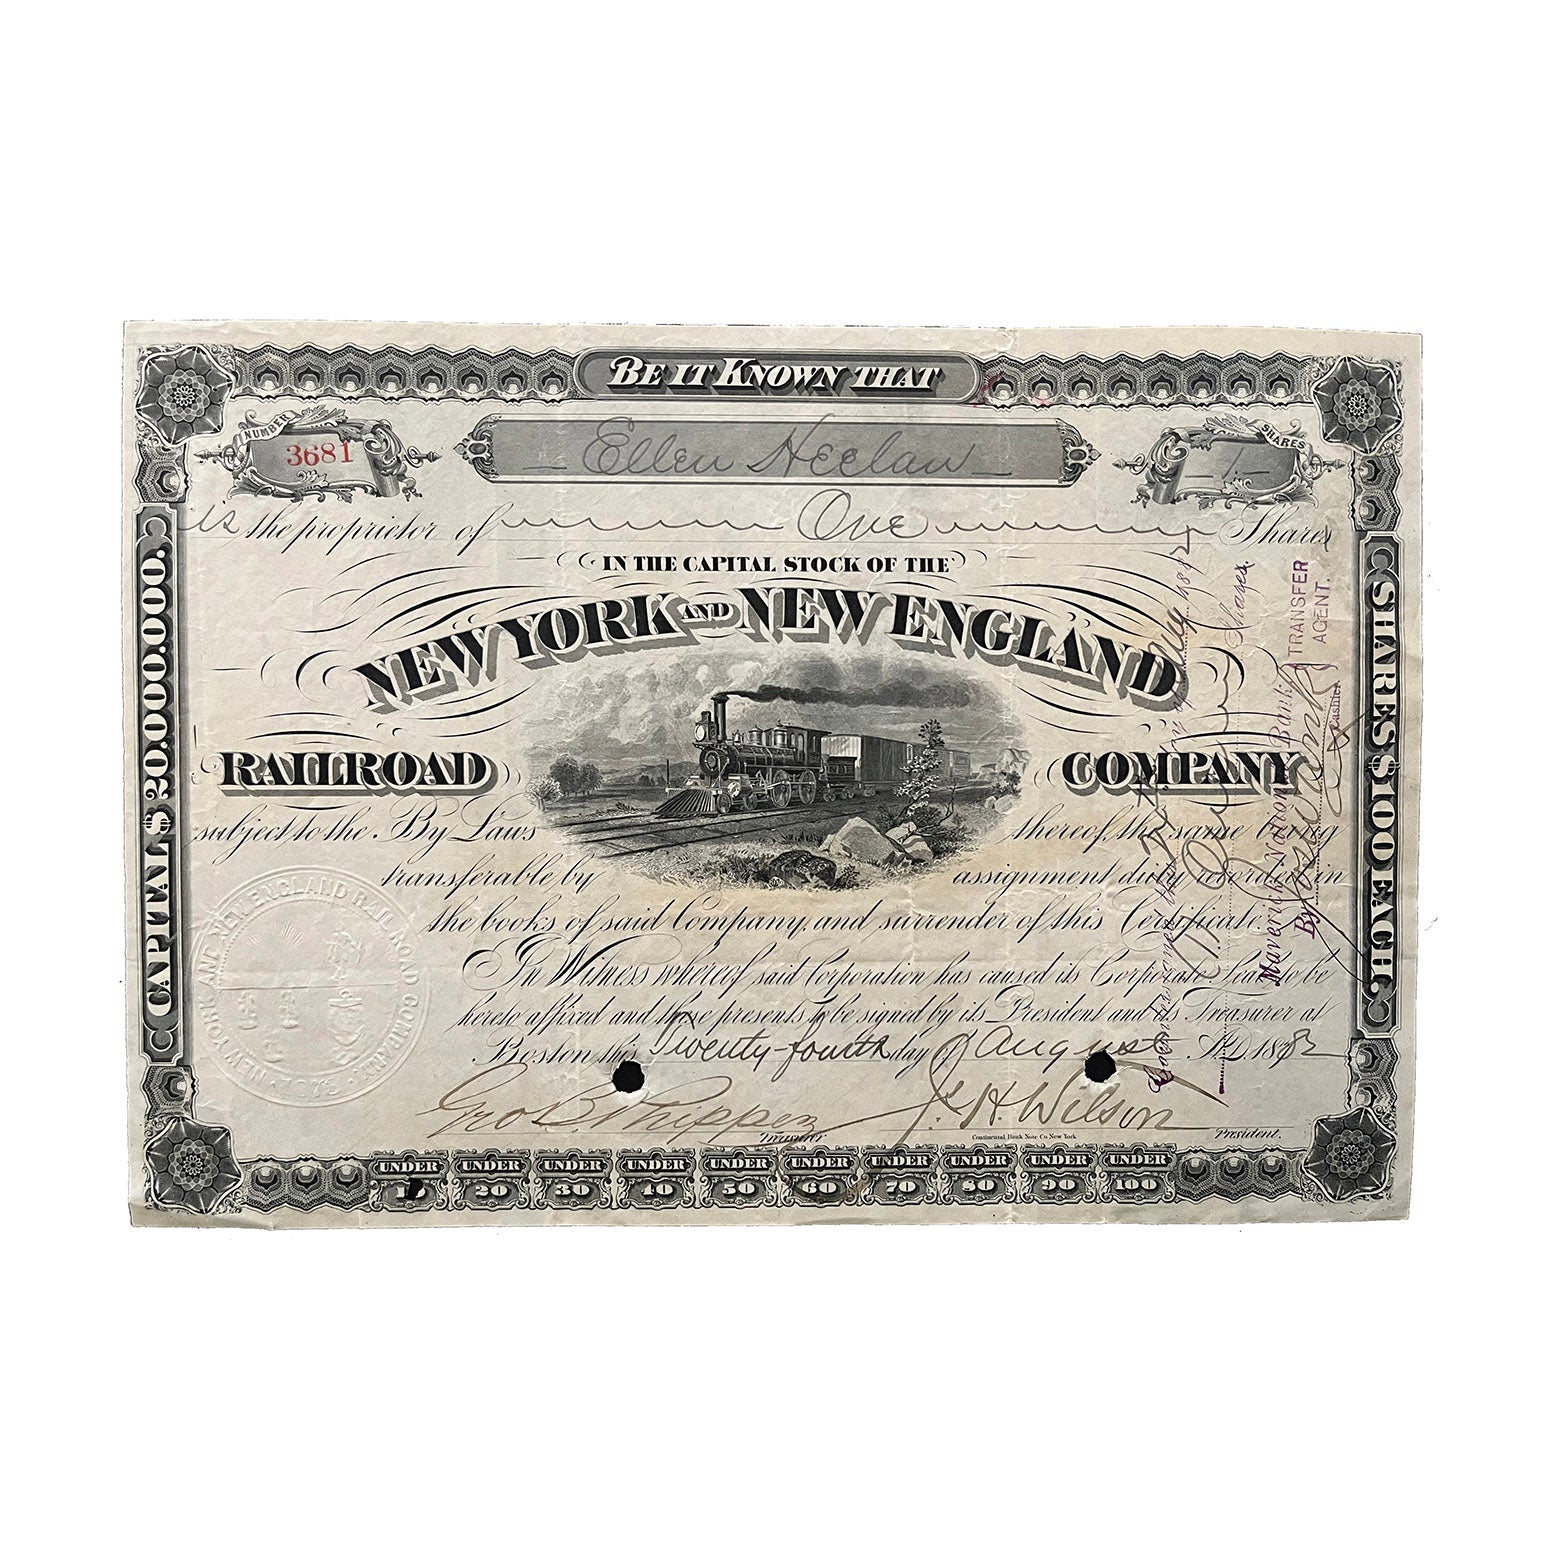 Original railway share certificate, New York and New England Railroad Company. Issued 1882.&nbsp;